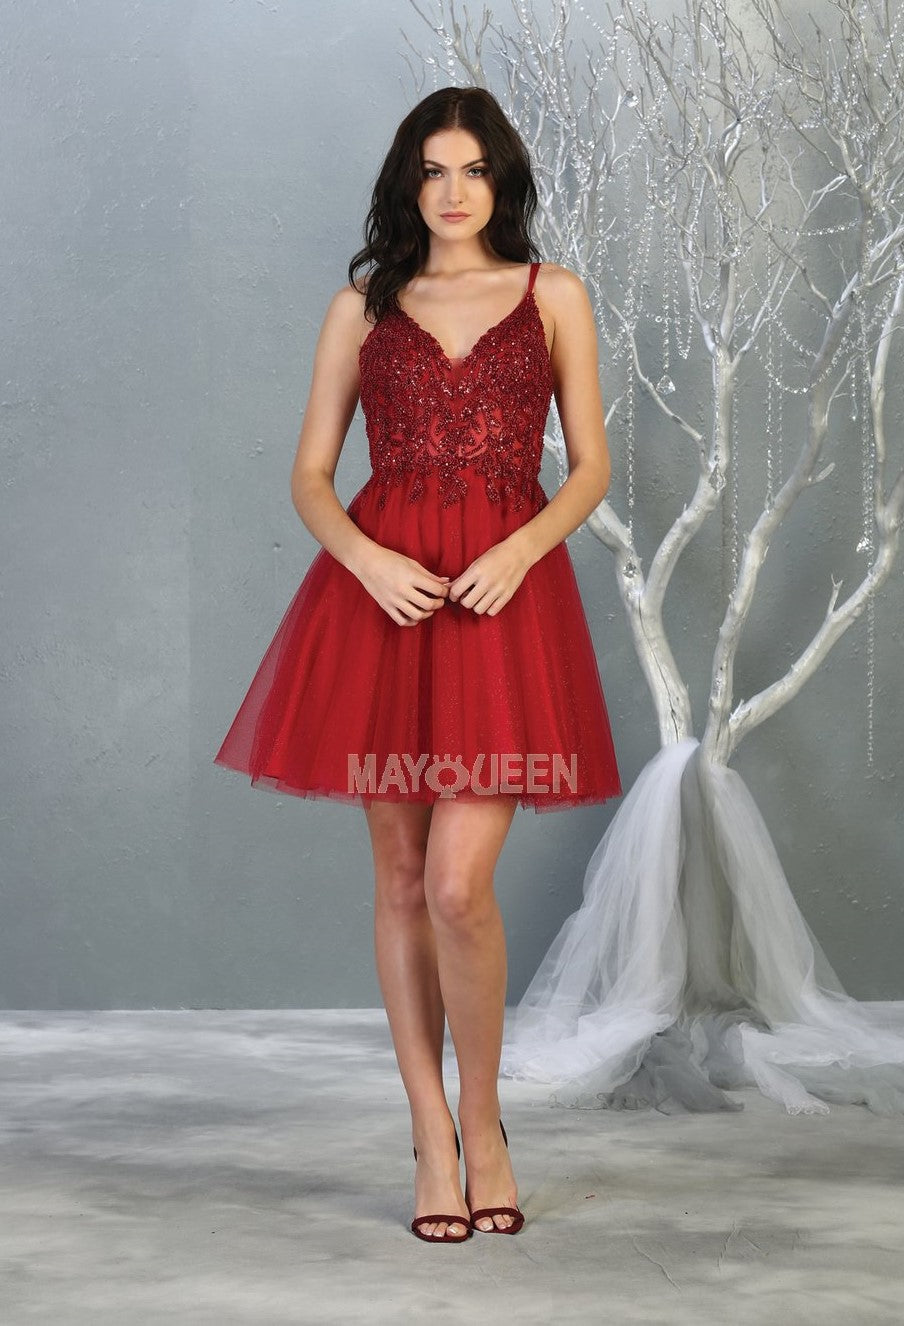 MQ 1813 - A-Line Homecoming Dress with Sheer Lace Embroidered Bodice & Layered Shimmering Tulle Skirt Homecoming Mayqueen 2 Burgundy 